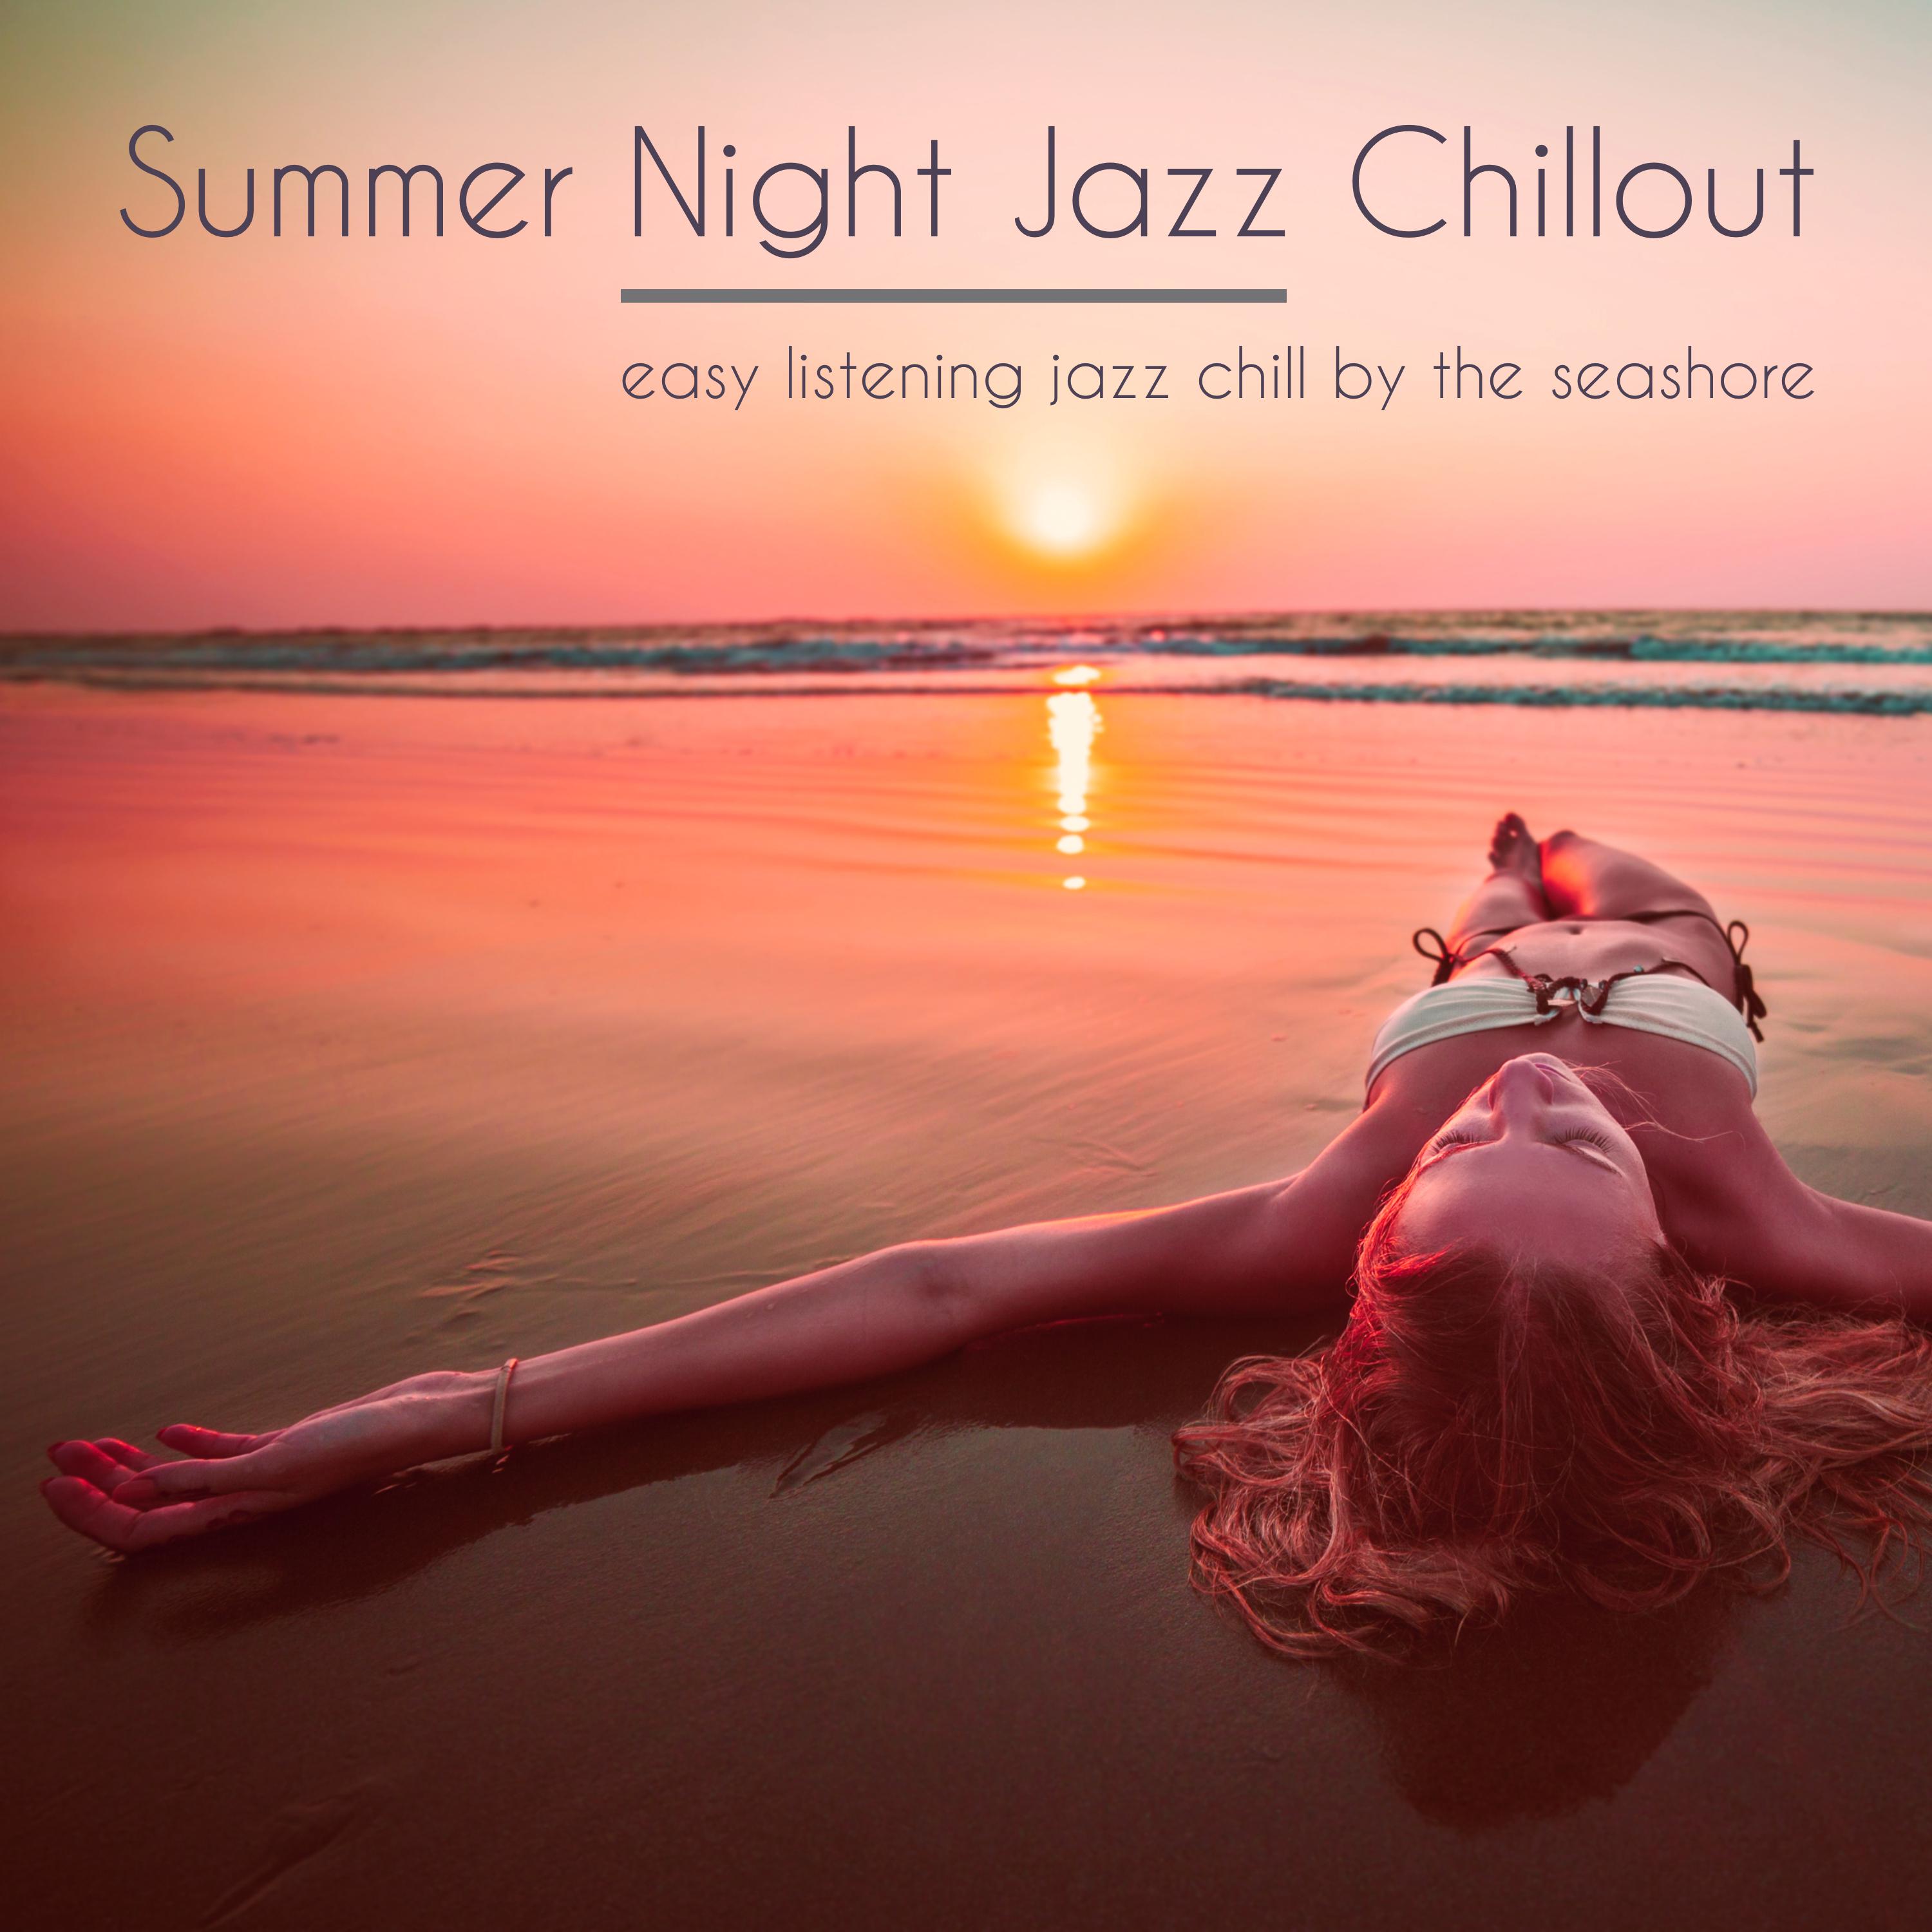 Chillout - Sax Song